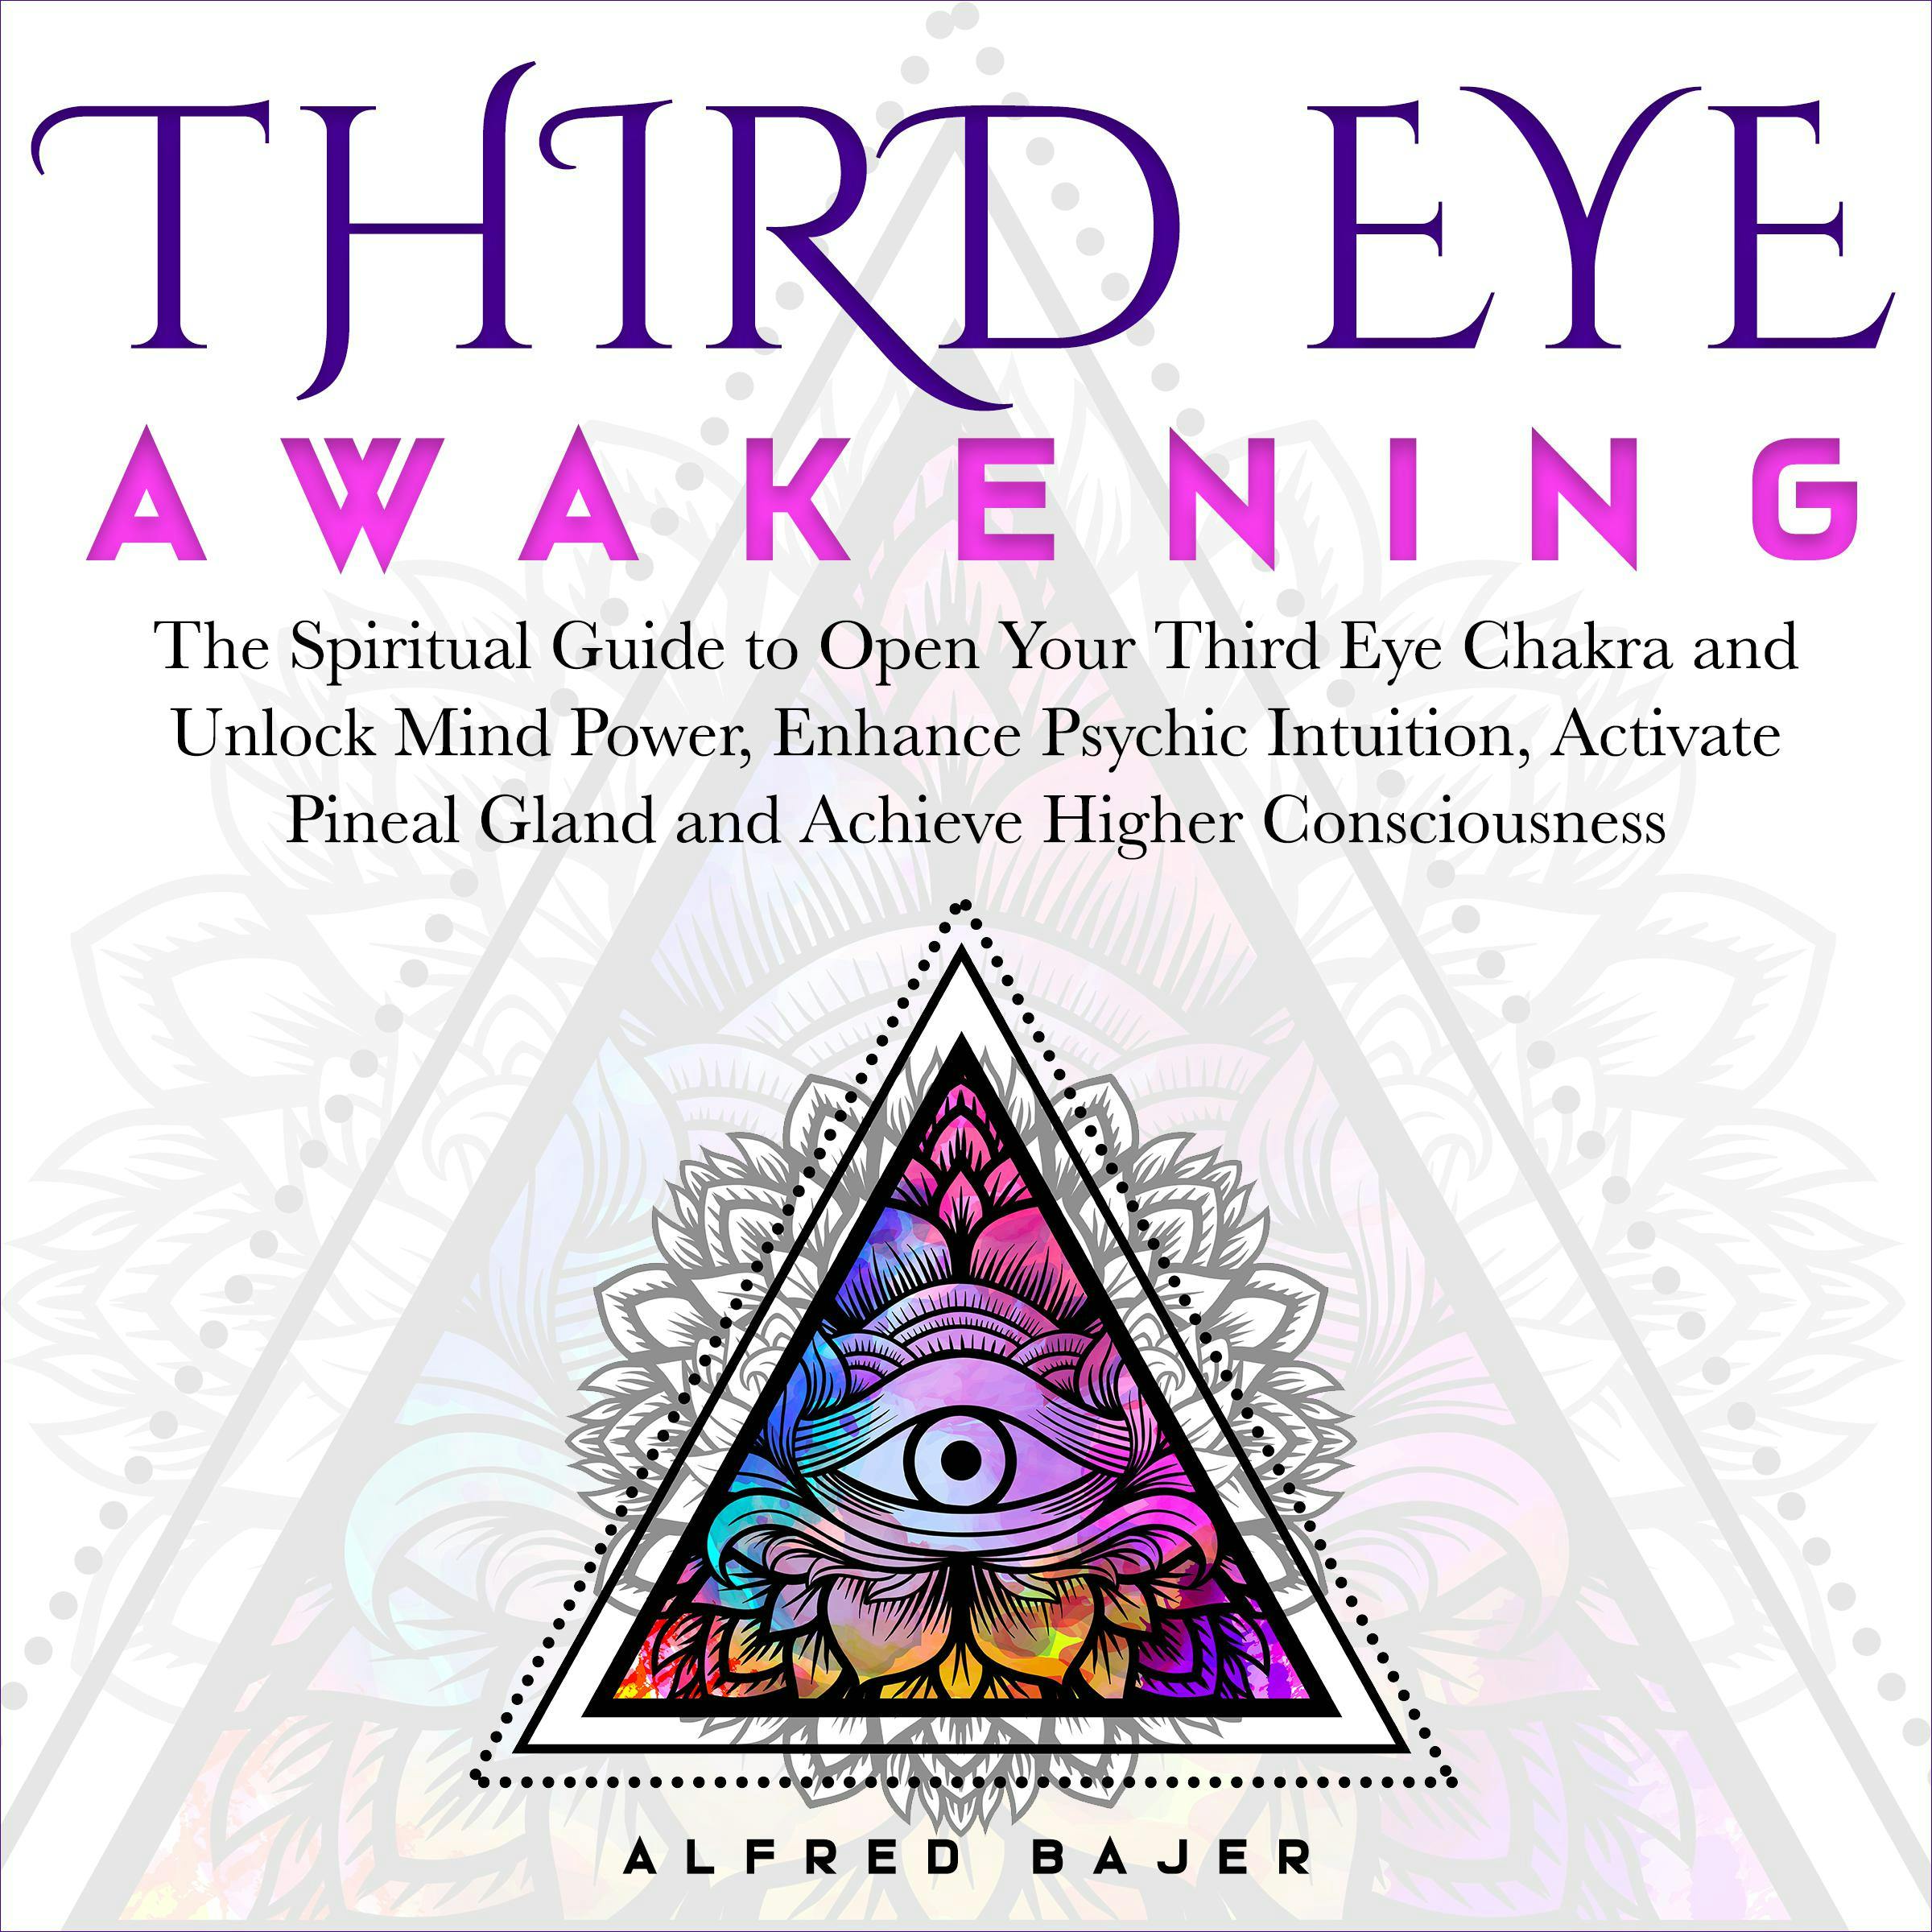 Third Eye Awakening: The Spiritual Guide to Open Your Third Eye Chakra and Unlock Mind Power, Enhance Psychic Intuition, Activate Pineal Gland and Achieve Higher Consciousness - undefined